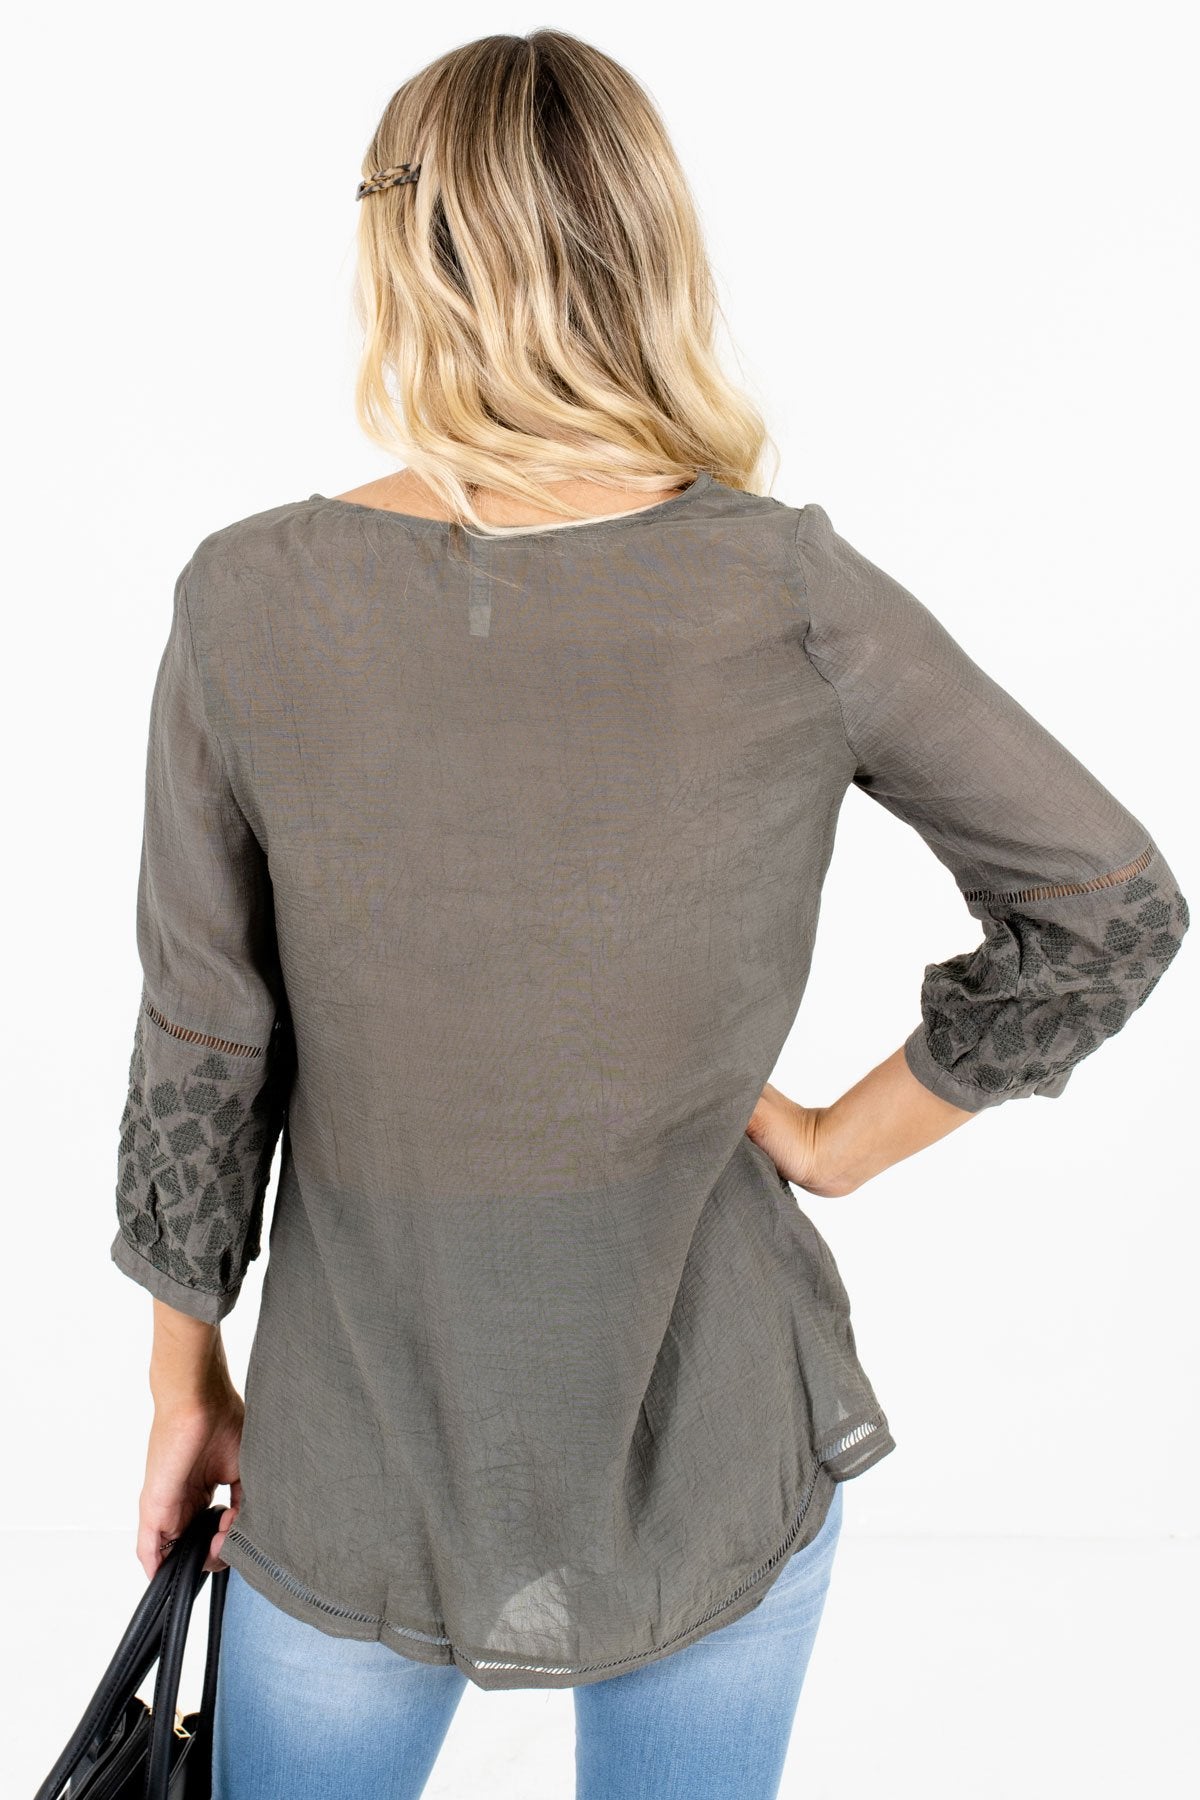 Women’s Olive Green Semi-Sheer Lightweight Material Boutique Top